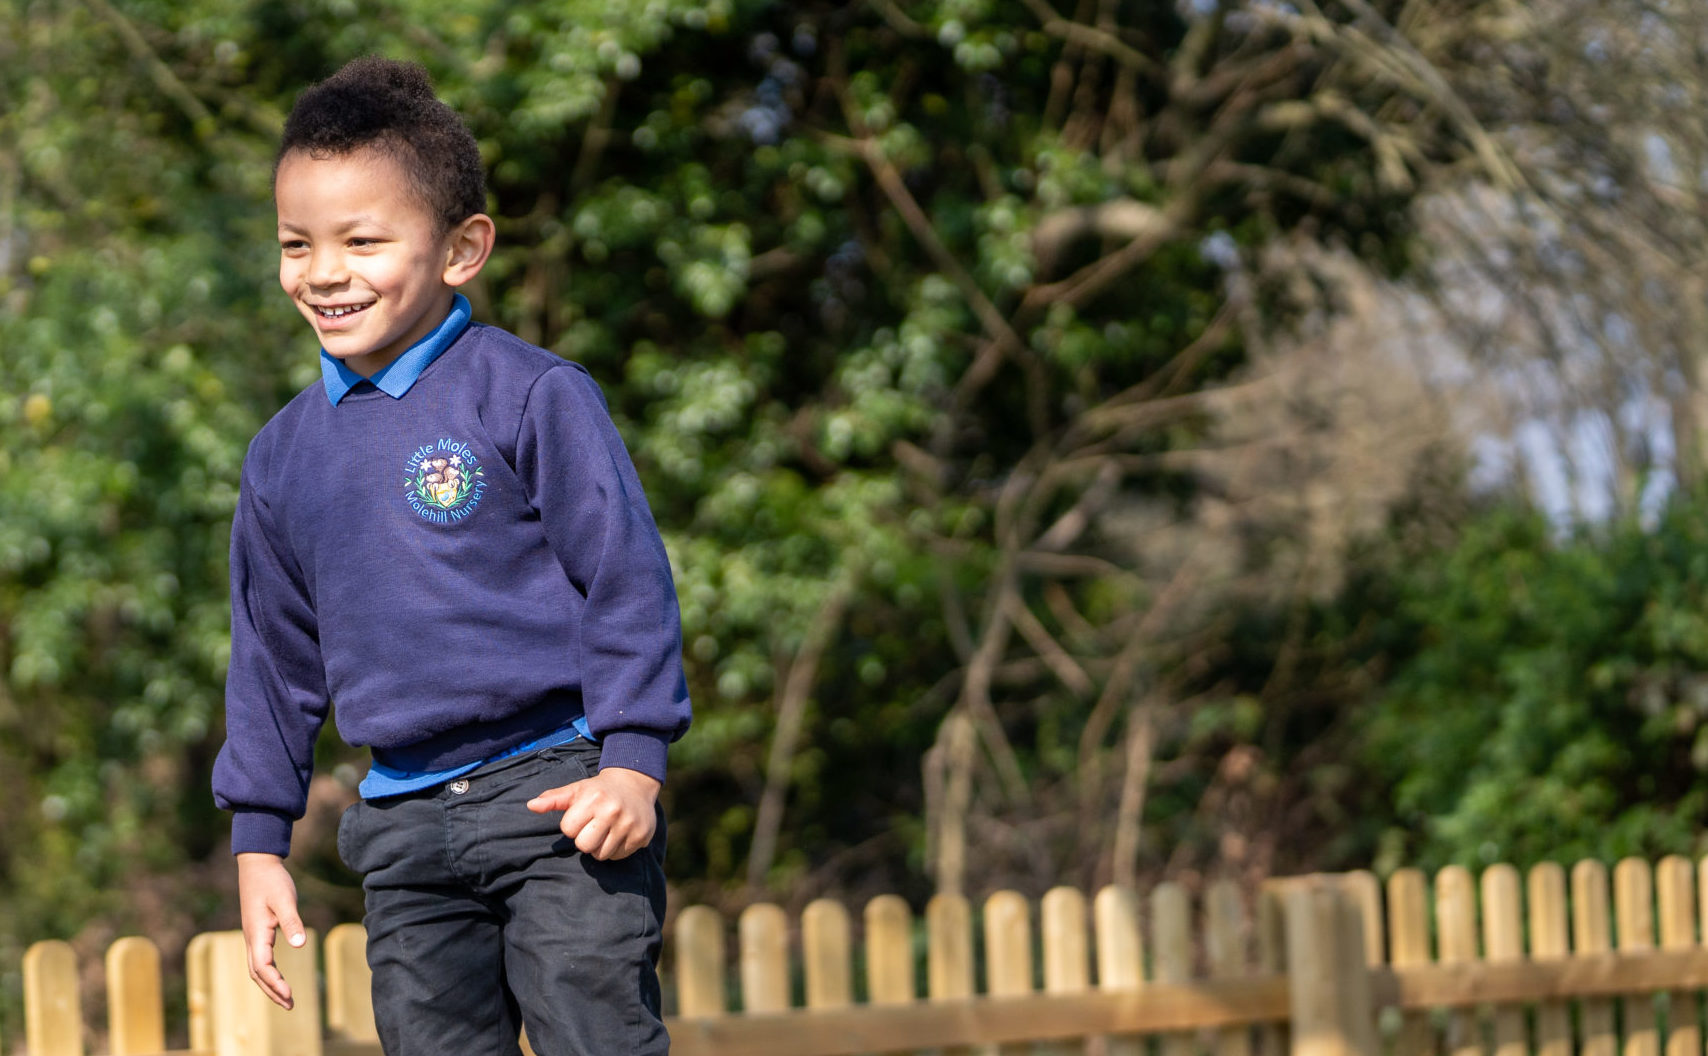 A young boy in Molehill Primary Academy uniform is seen smiling, whilst standing in a sunny outdoor area.